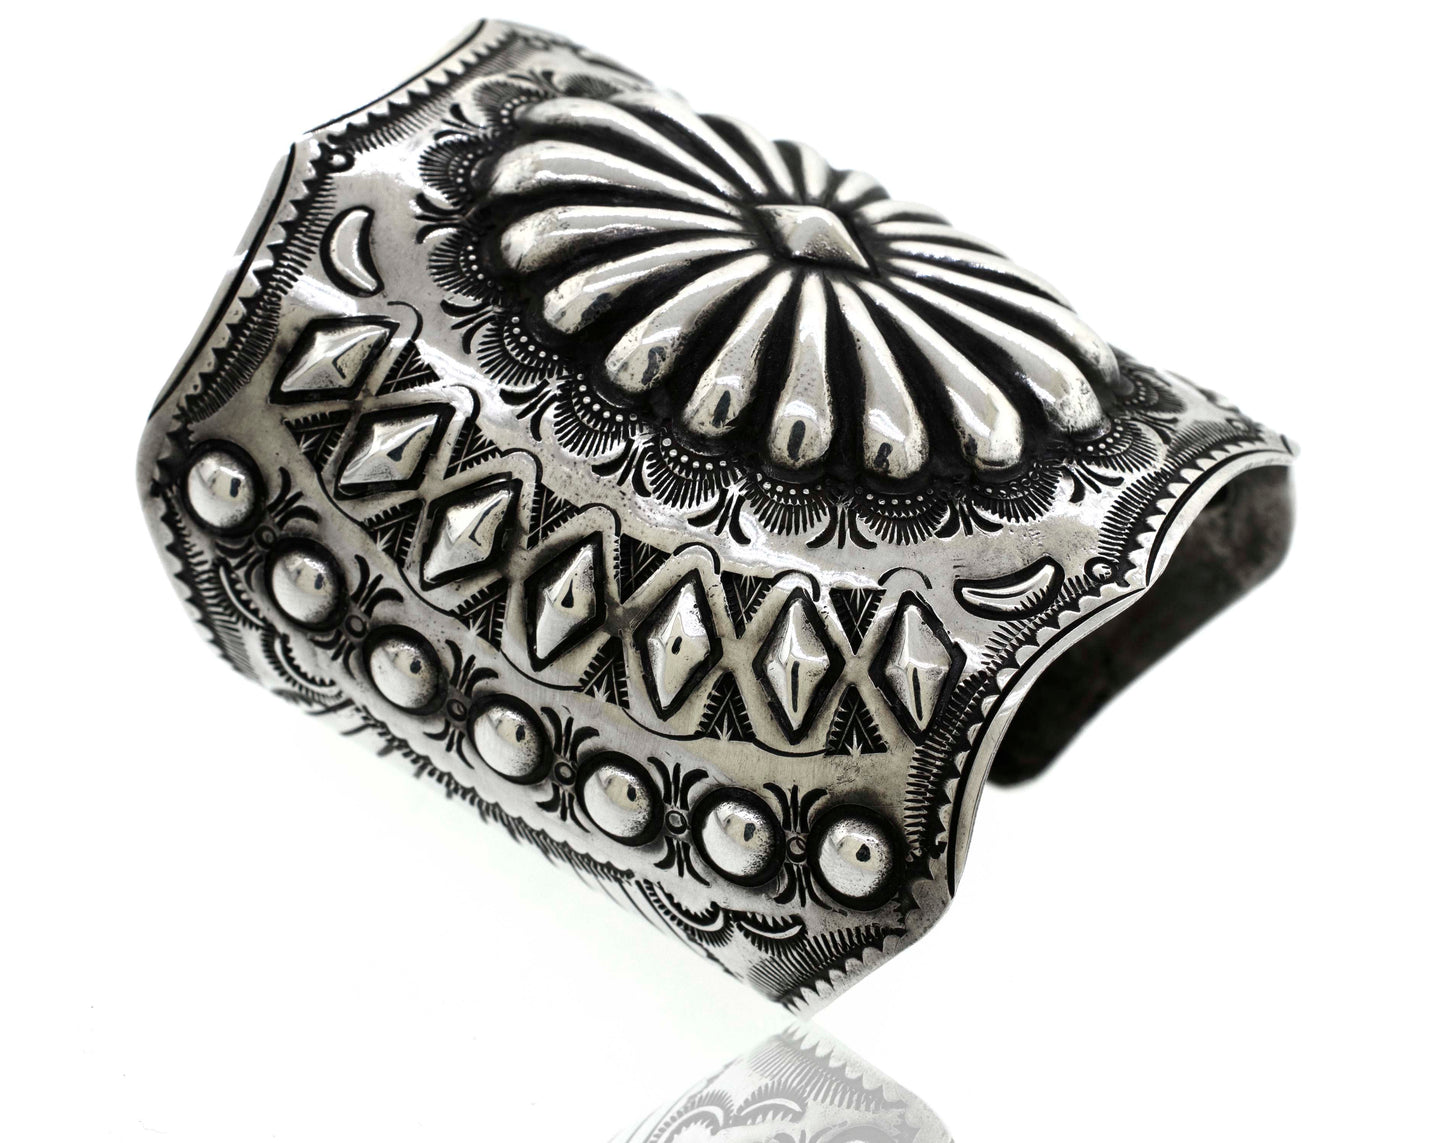 
                  
                    *Handcrafted Silver Concho Cuff* with intricate engraved patterns, including geometric shapes, floral motifs, and rows of raised dot accents, reminiscent of a traditional Native American concho cuff.
                  
                